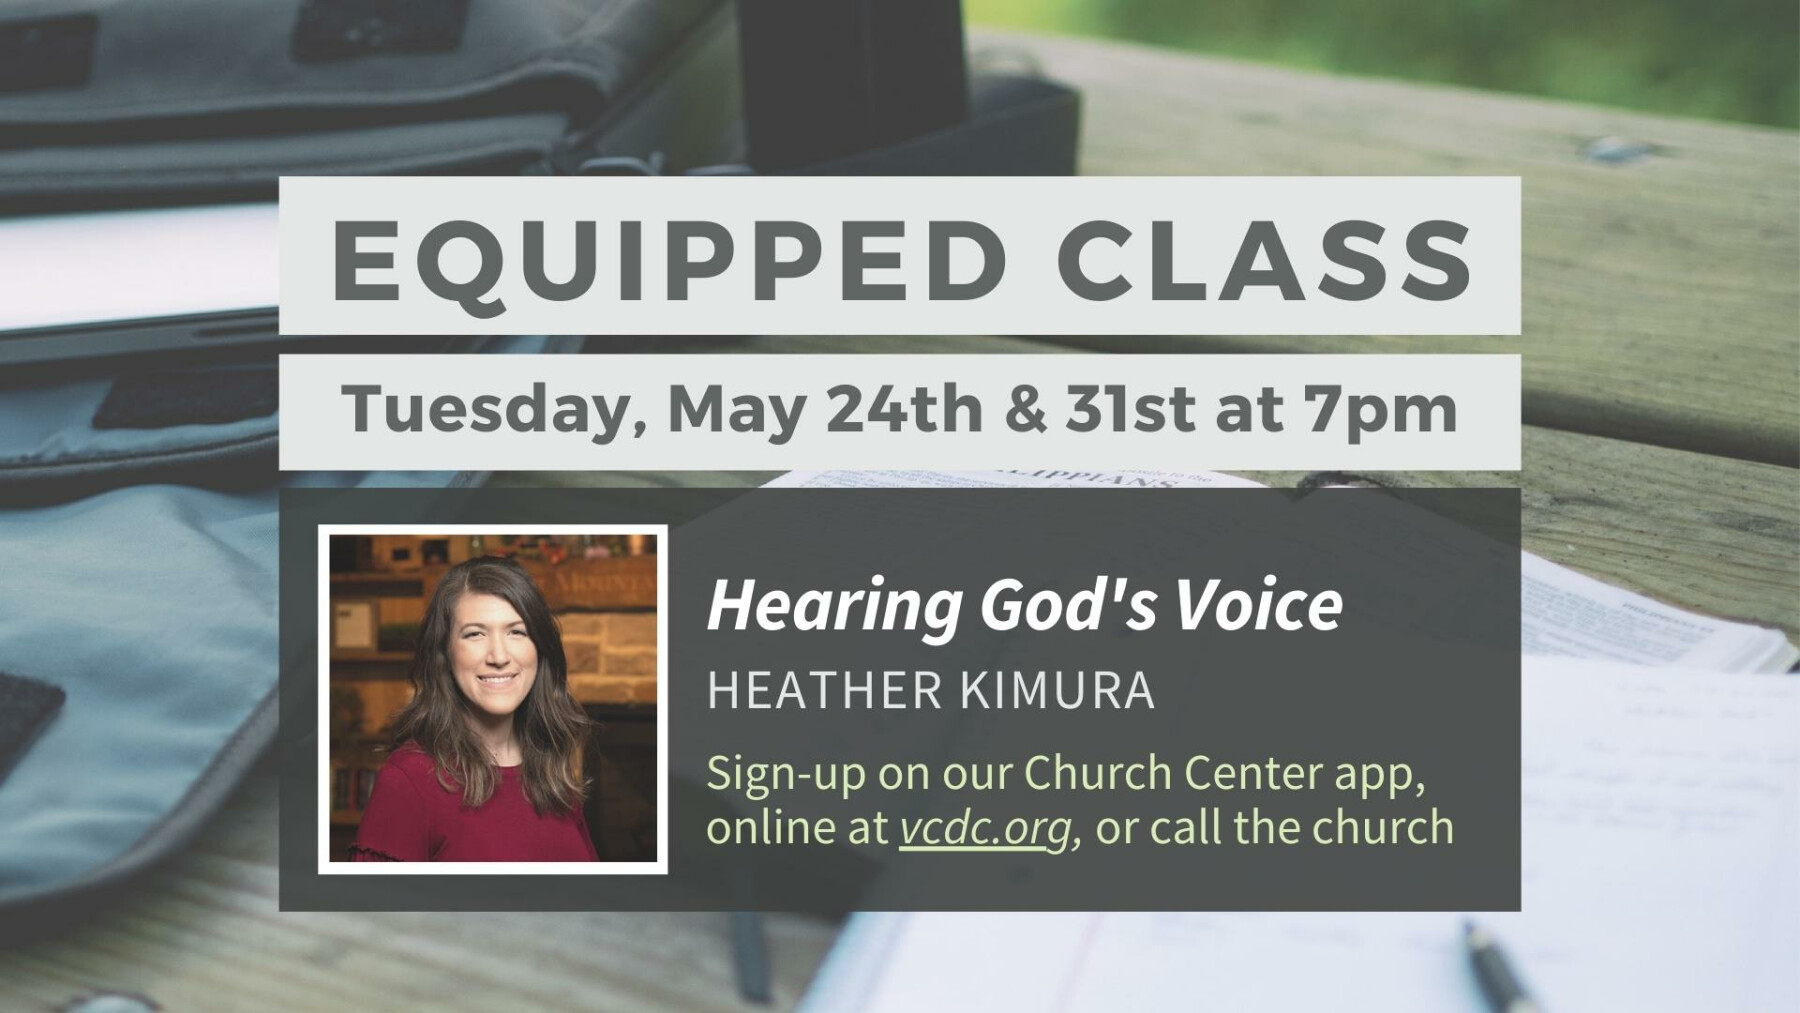 Equipped Class: Hearing God's Voice - Tuesday, May 24th & 31st at 7pm